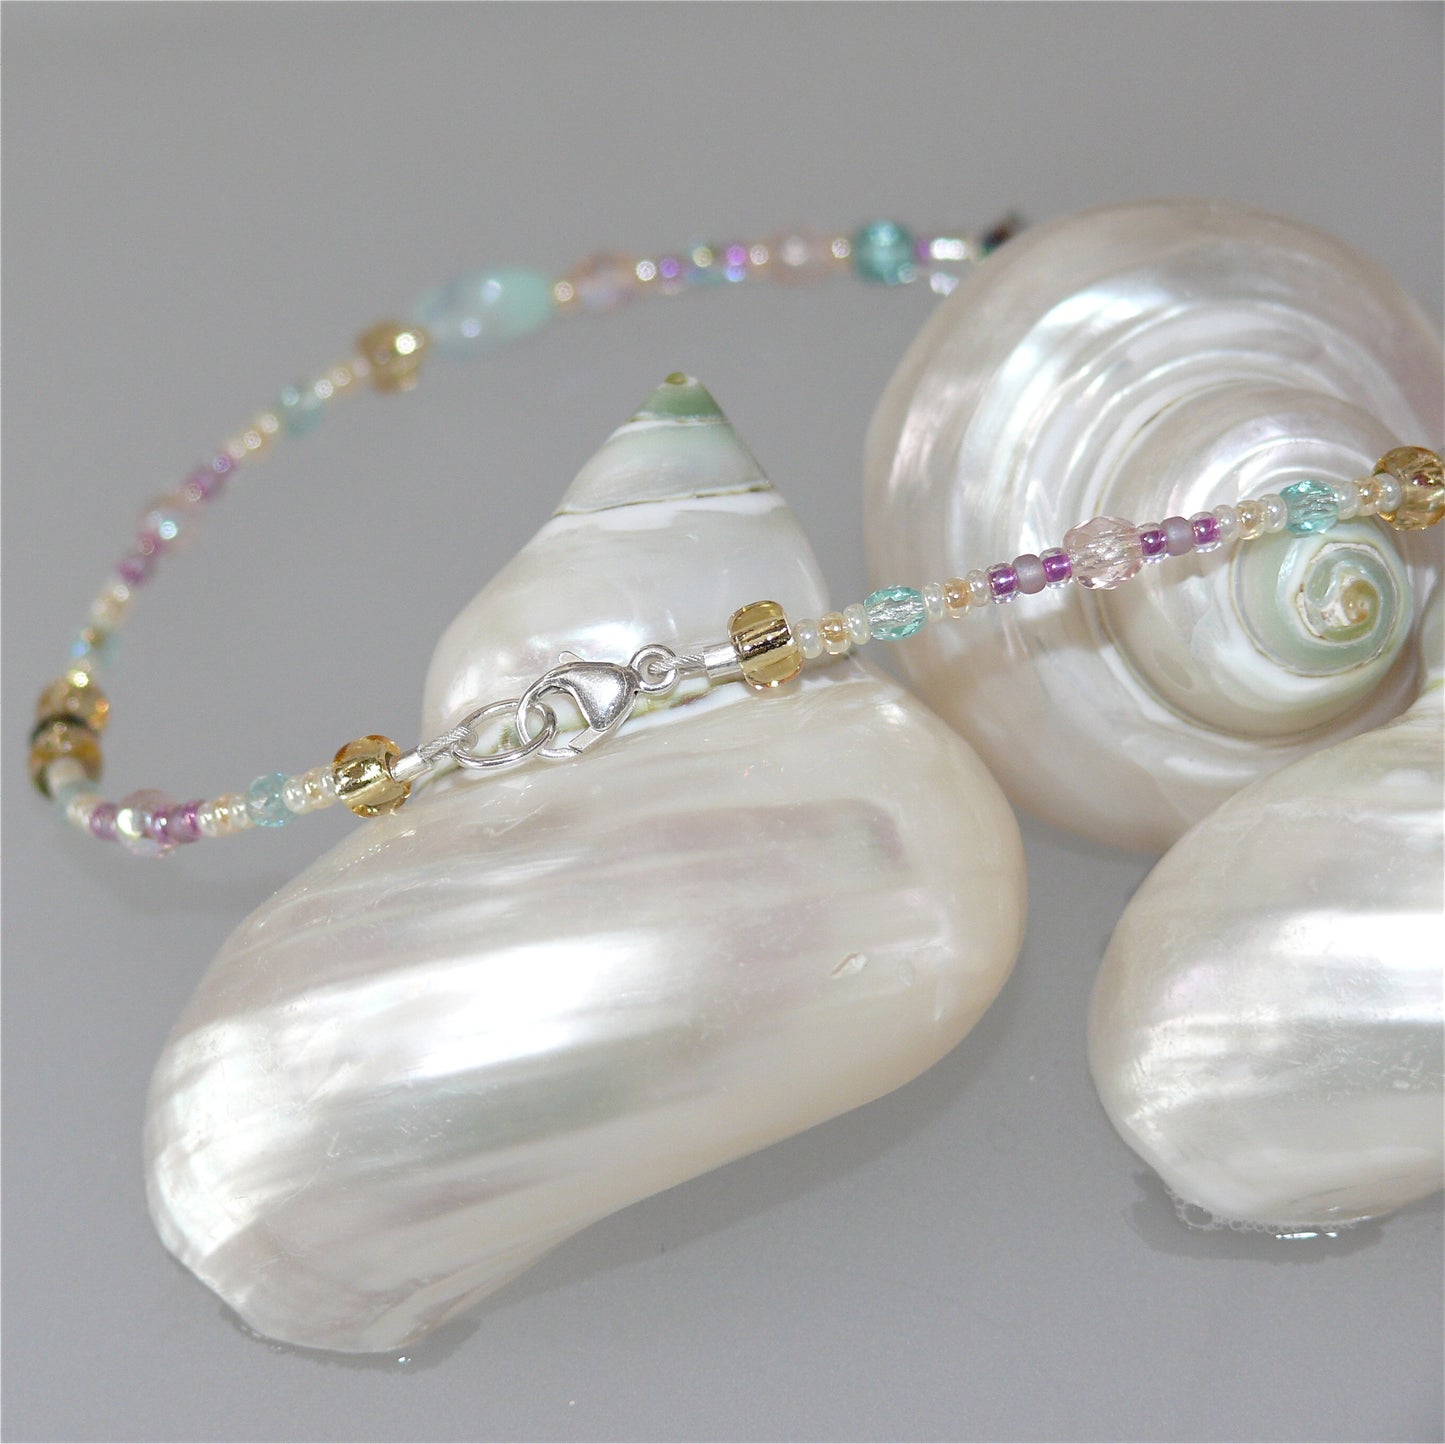 "Tranquil Waters" Ankle Bracelet by Arpaia Lang from Mystical Mermaid Reflections Collection